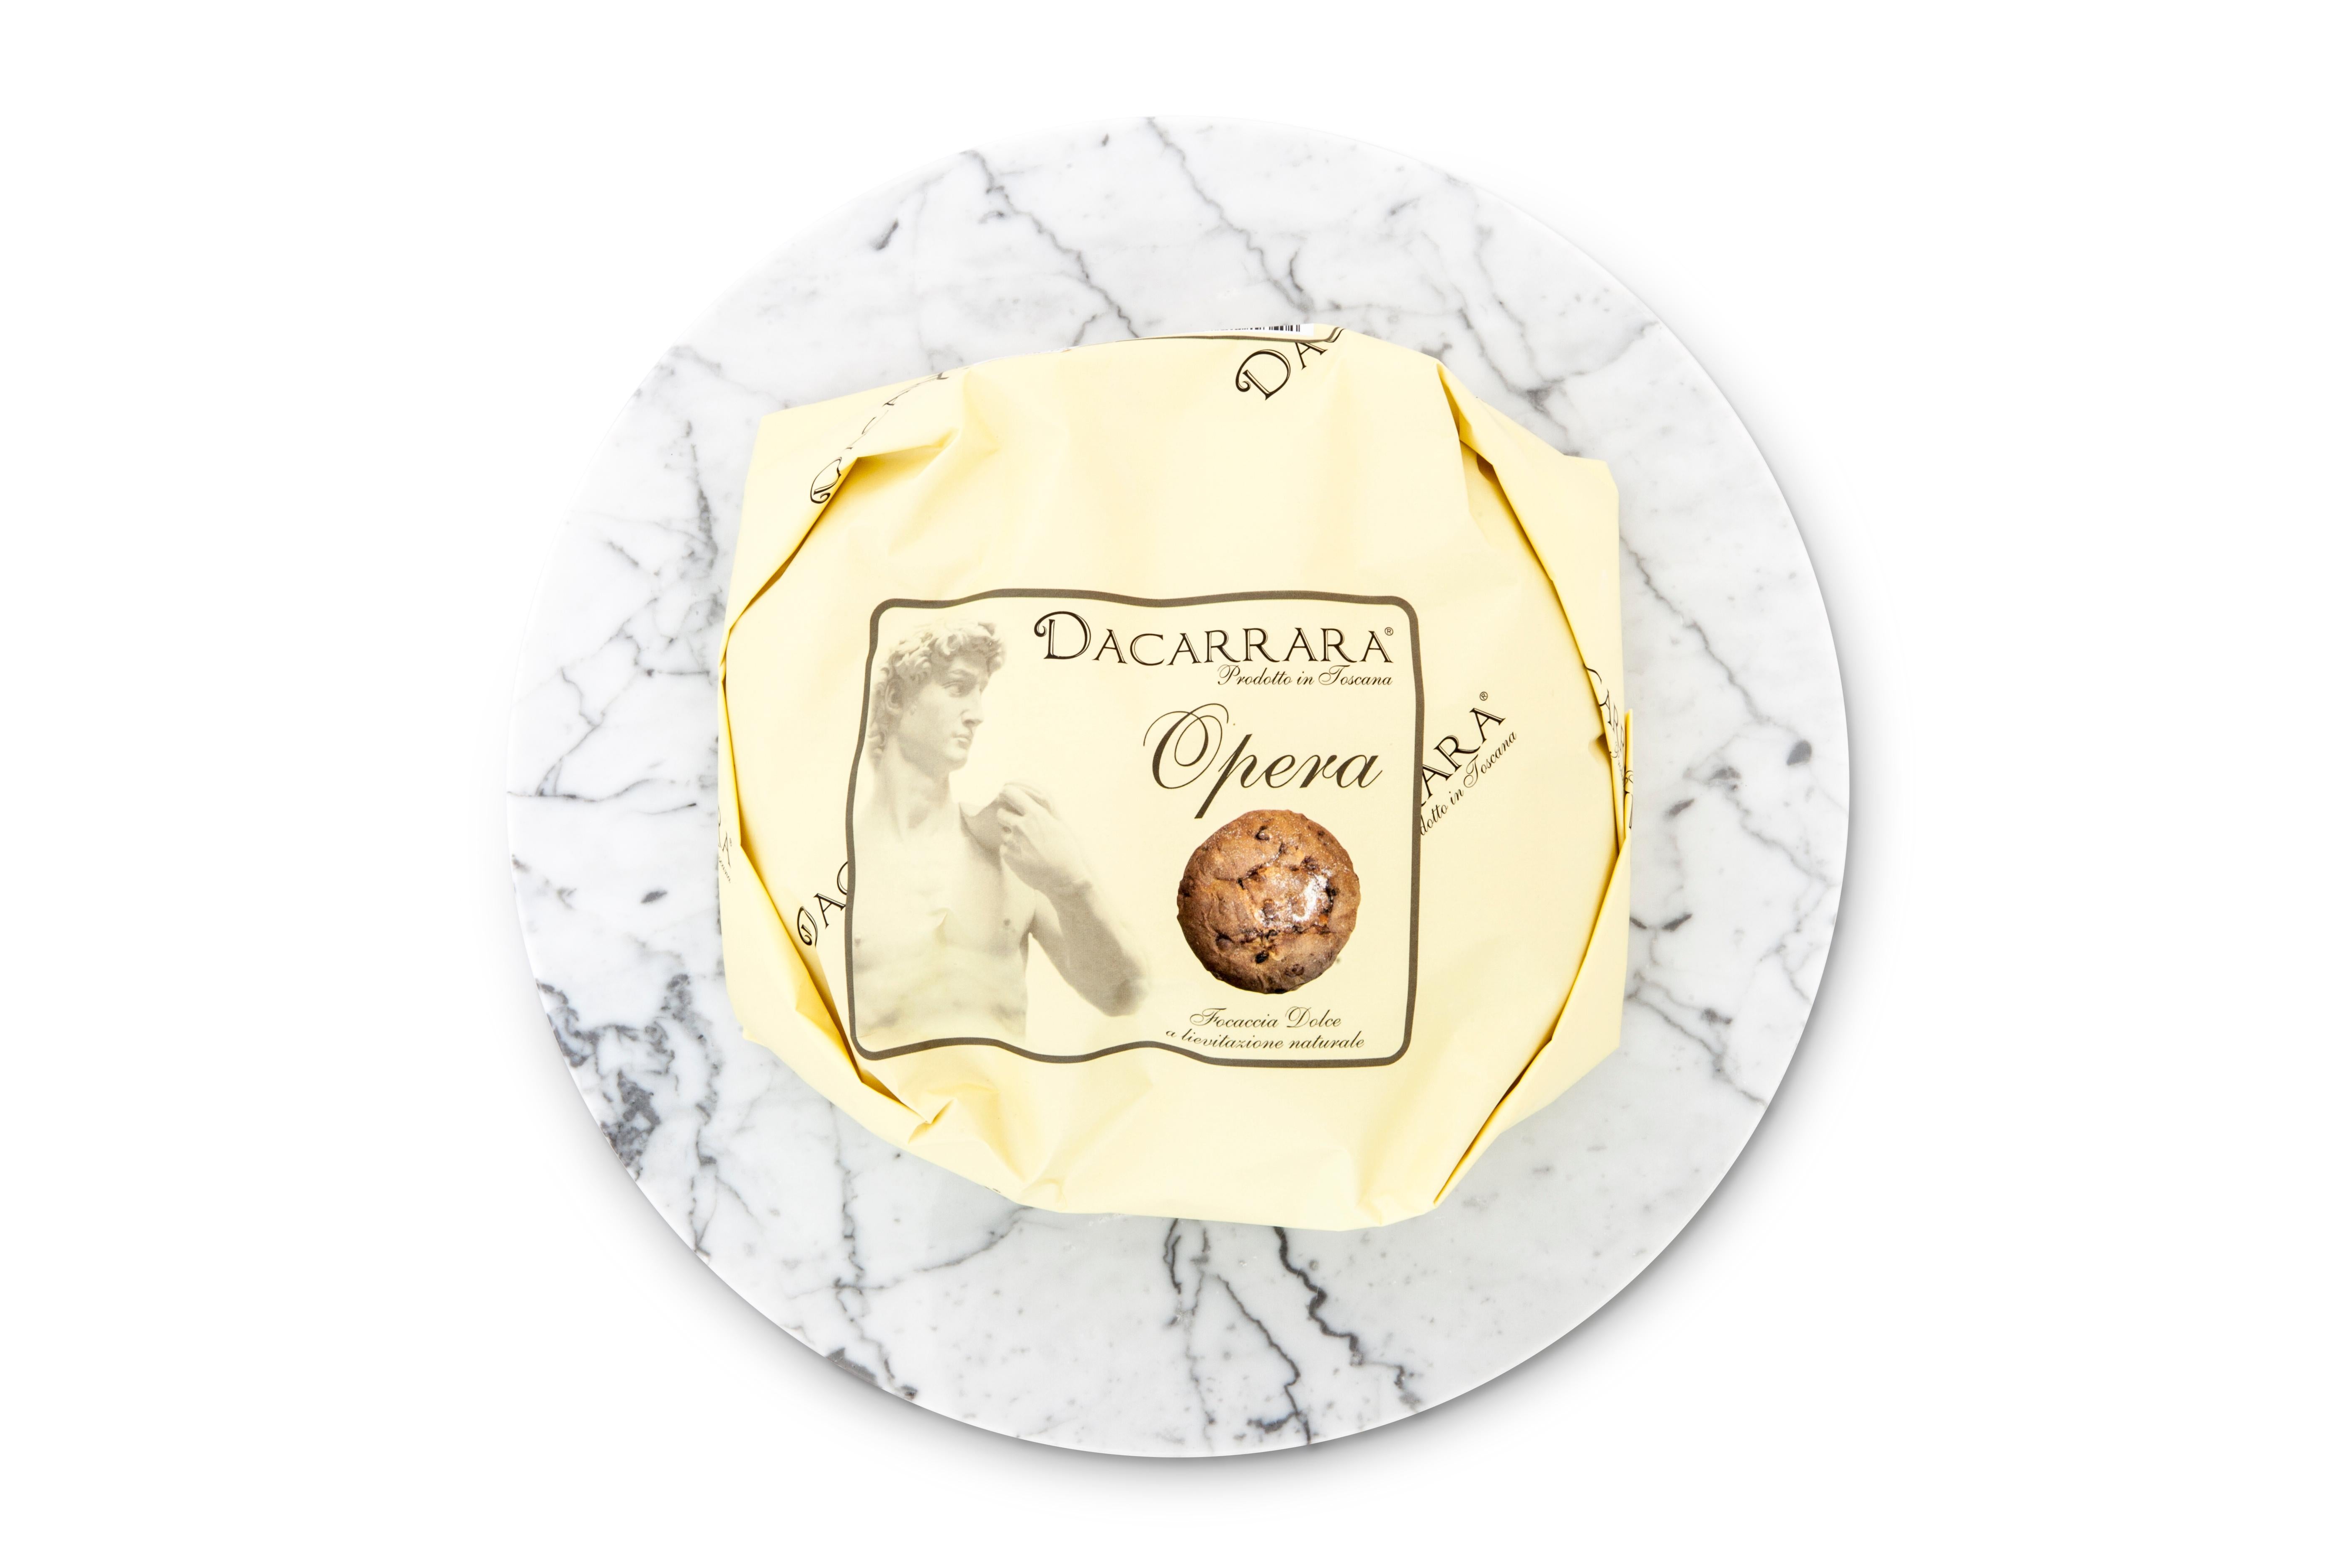 Rounded white Carrara marble cheese plate. Each piece is in a way unique (every marble block is different in veins and shades) and handmade by Italian artisans specialized over generations in processing marble. Slight variations in shape, color and